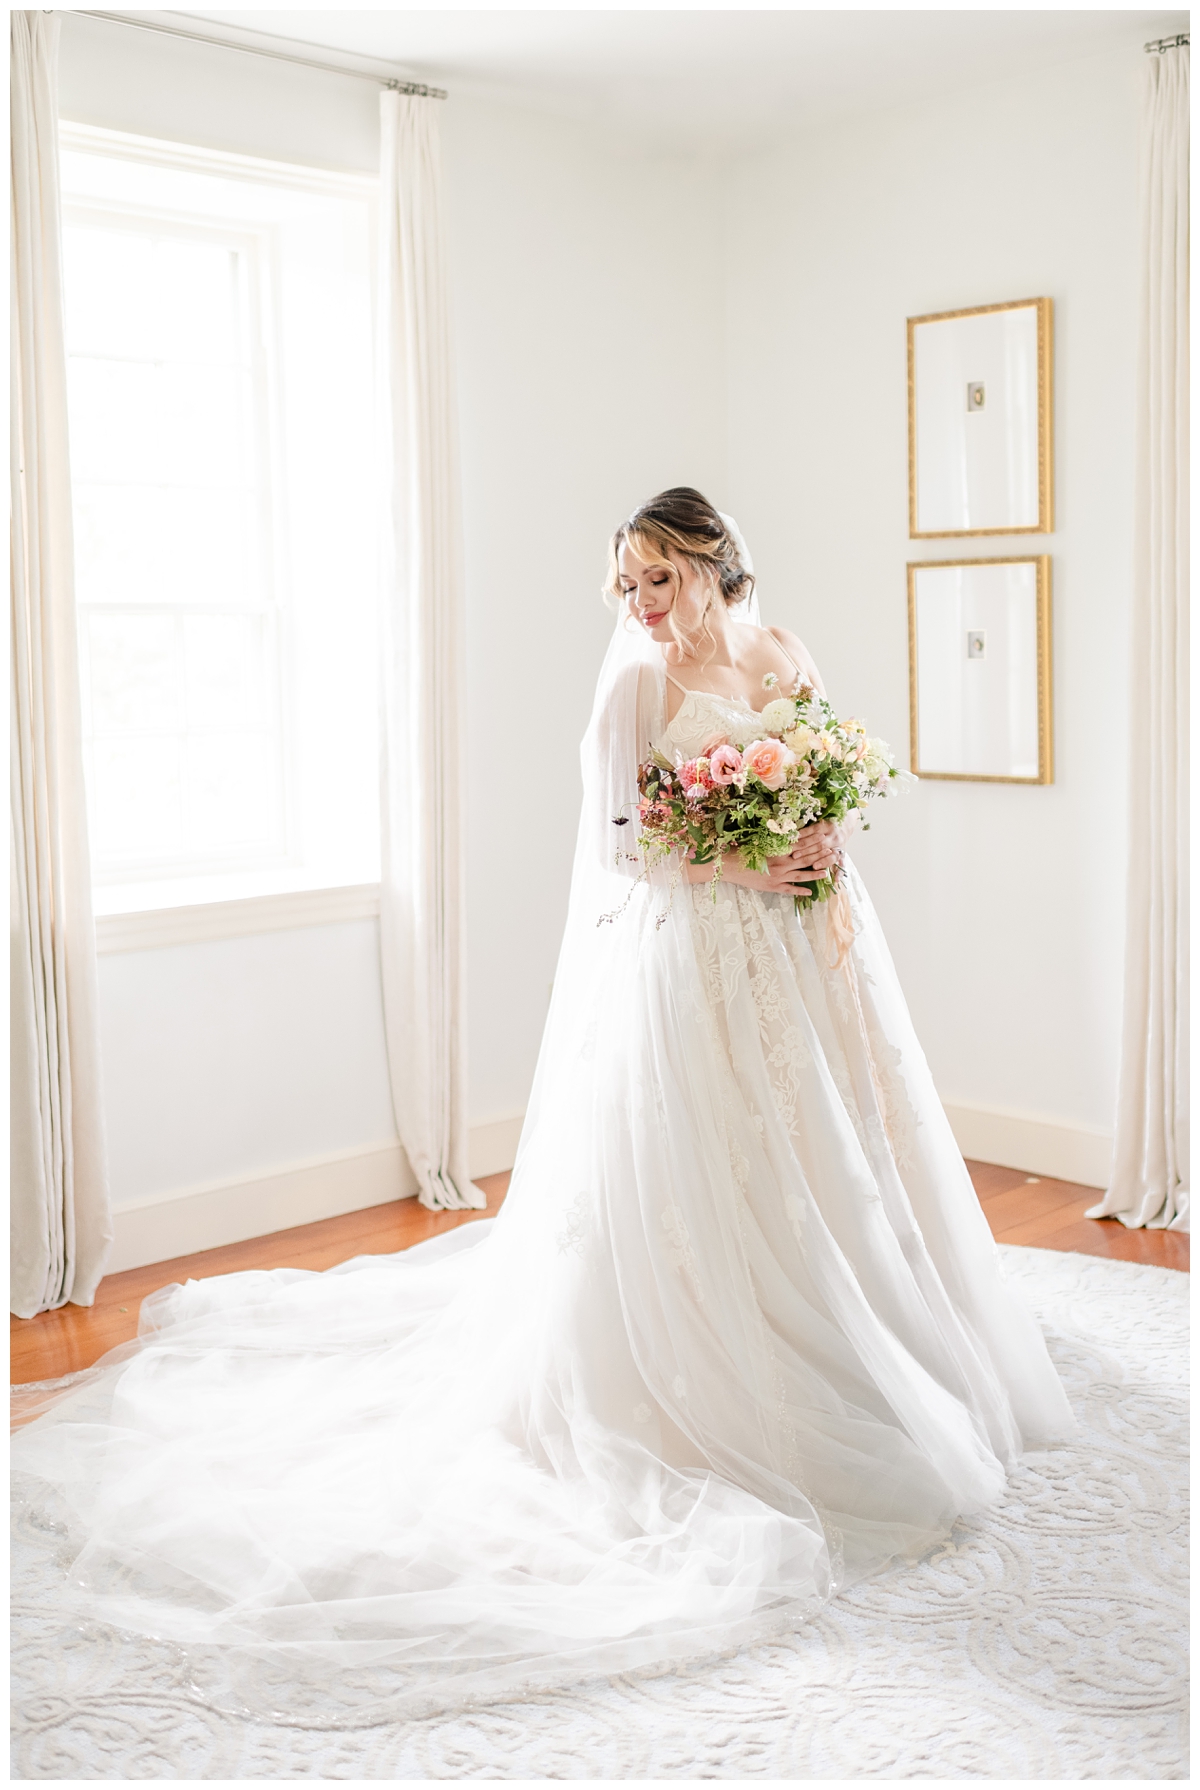 Elegant and classic wedding photographer in lancaster, PA